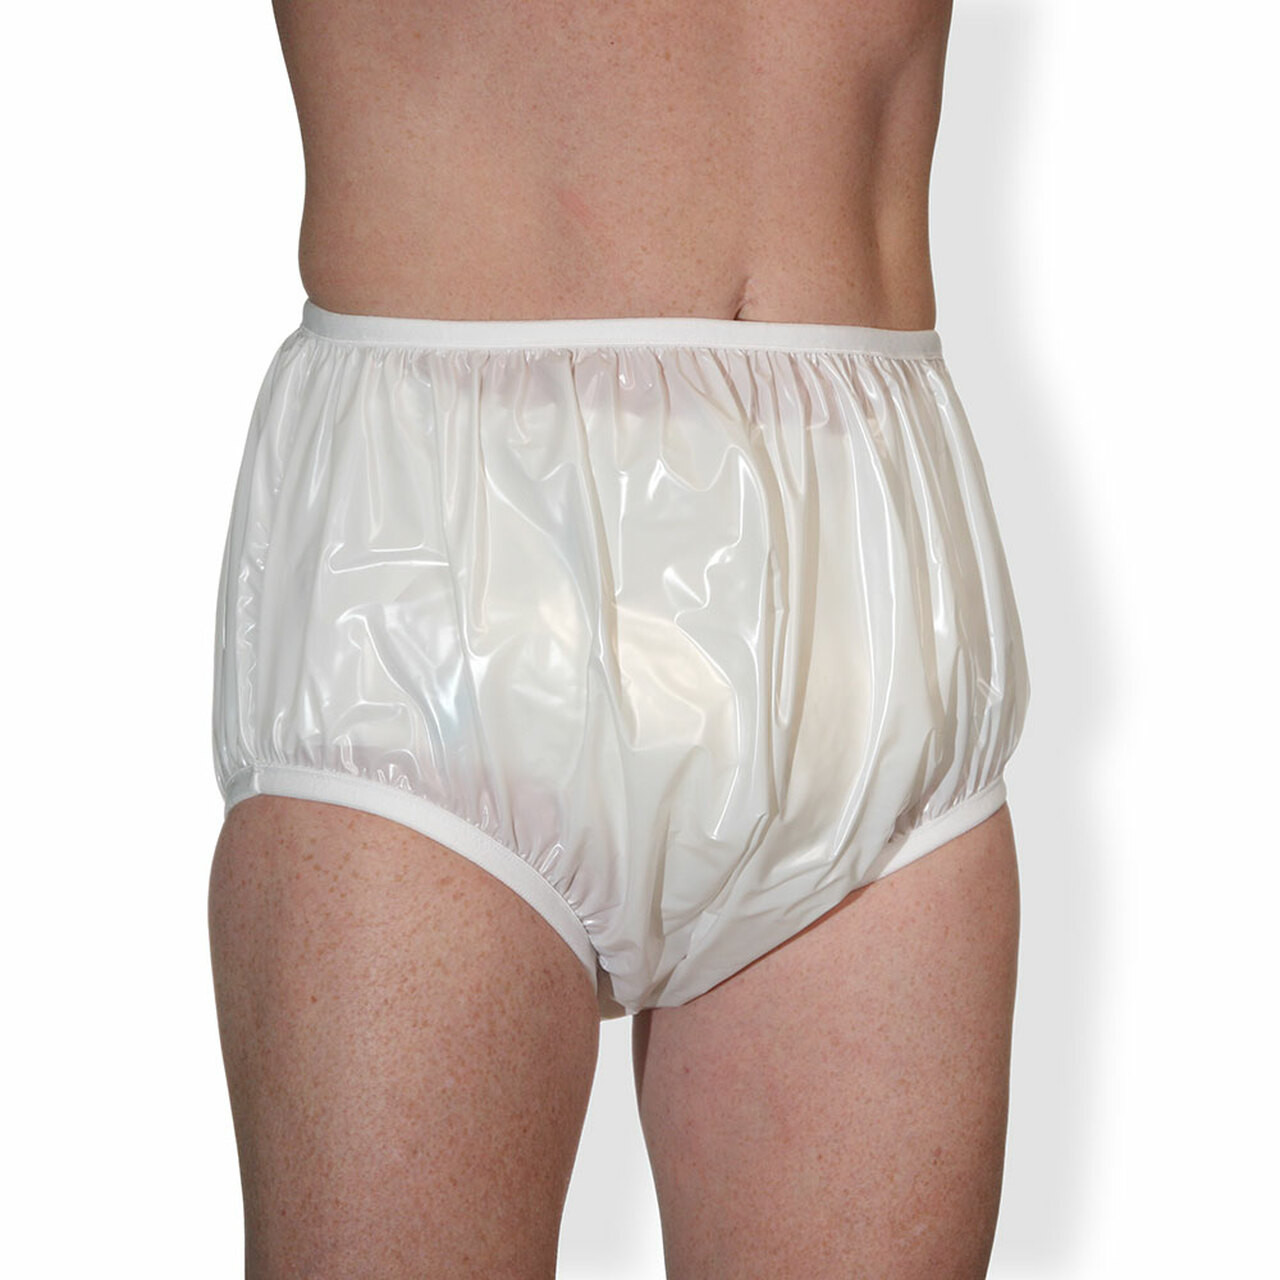 White Popping Plastic Pants PVC Adult Diaper Nappy Incontinence ABDL Ddlg -   Canada